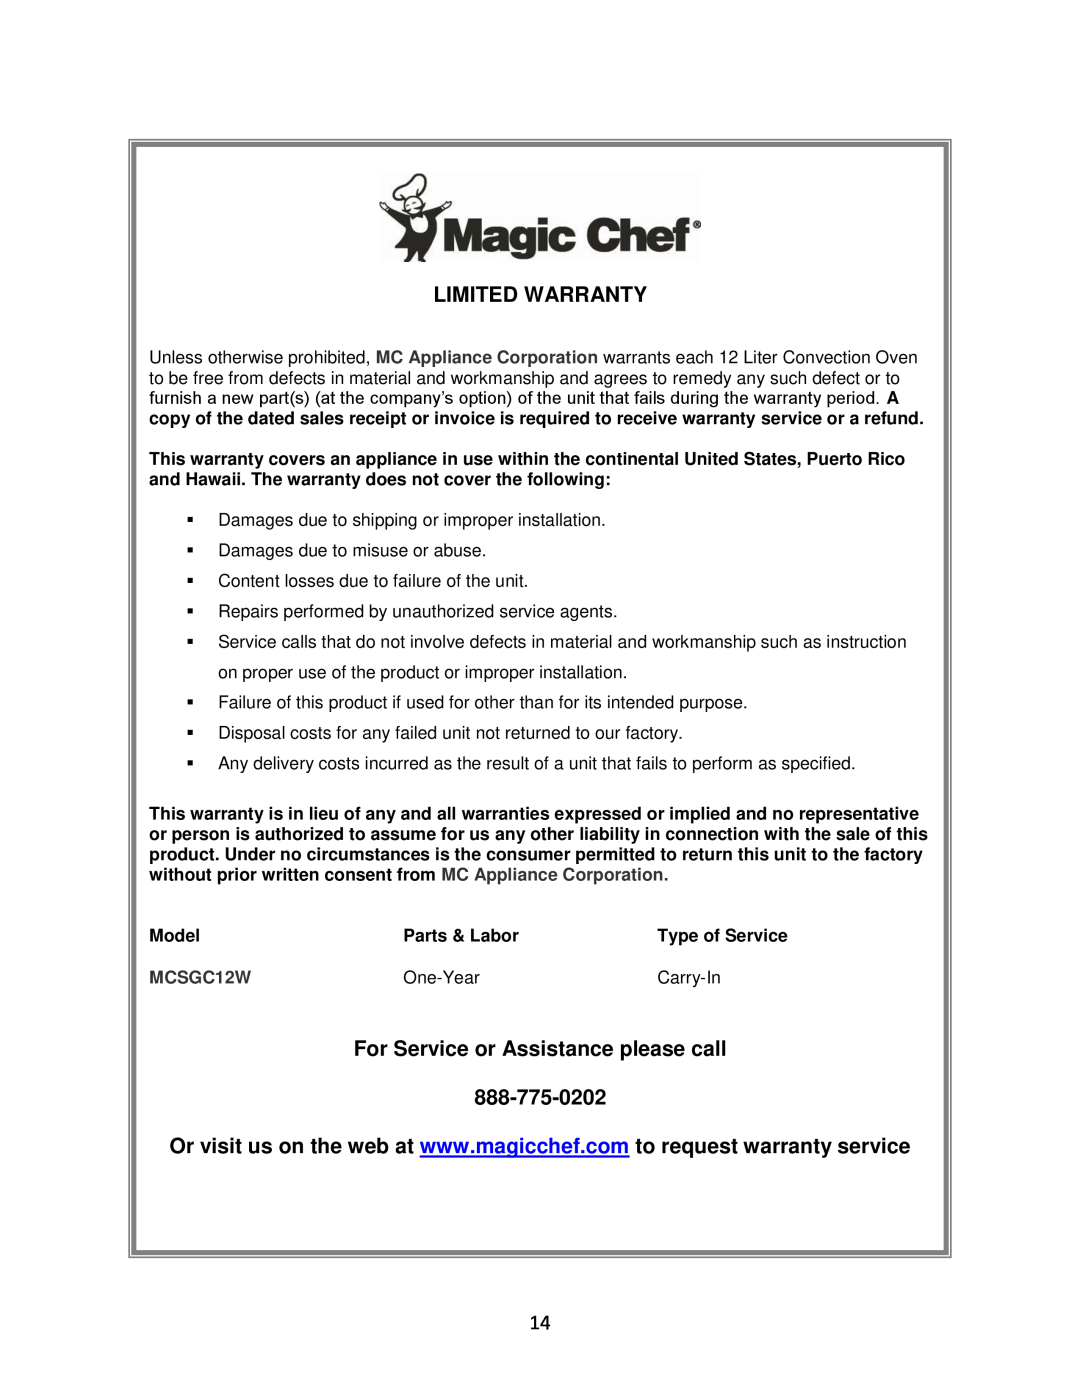 Magic Chef MCSGC12W instruction manual Limited Warranty, For Service or Assistance please call 